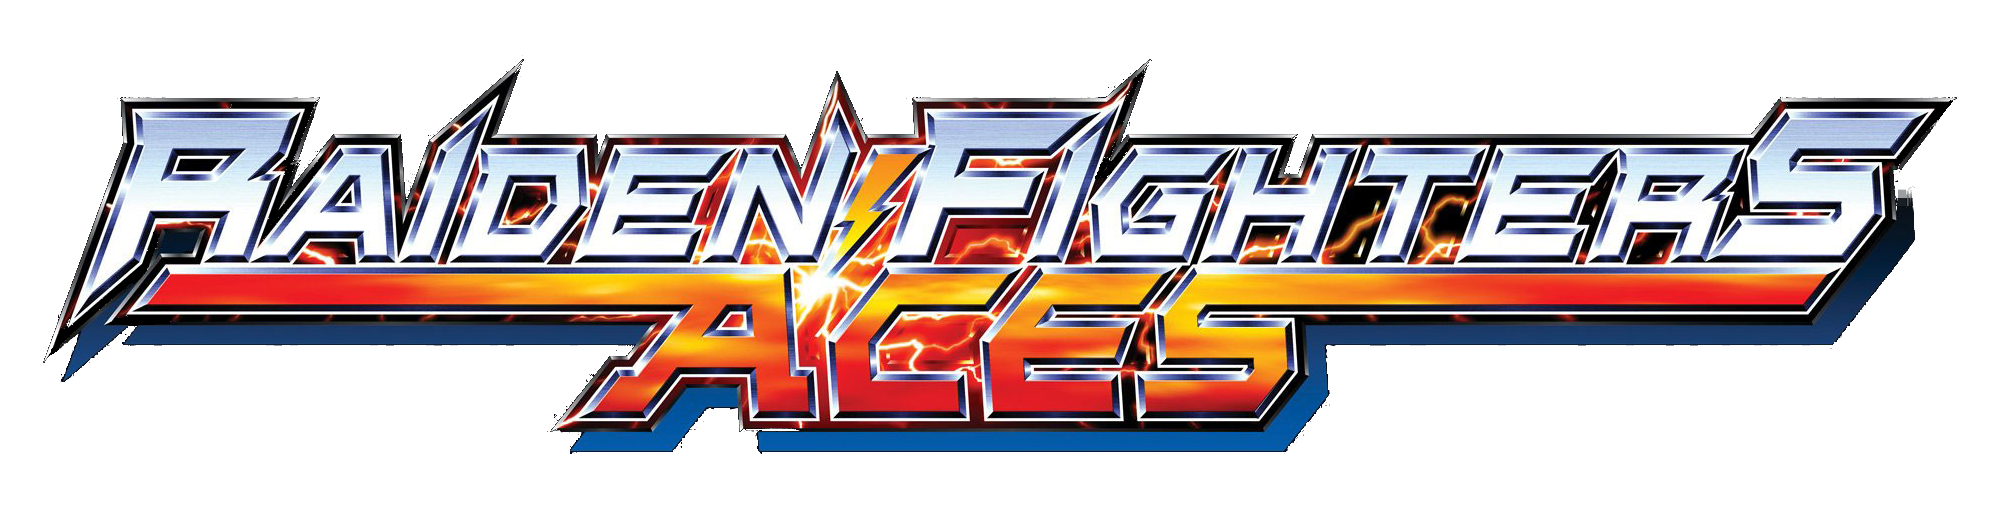 Raiden Fighters Aces Images - LaunchBox Games Database